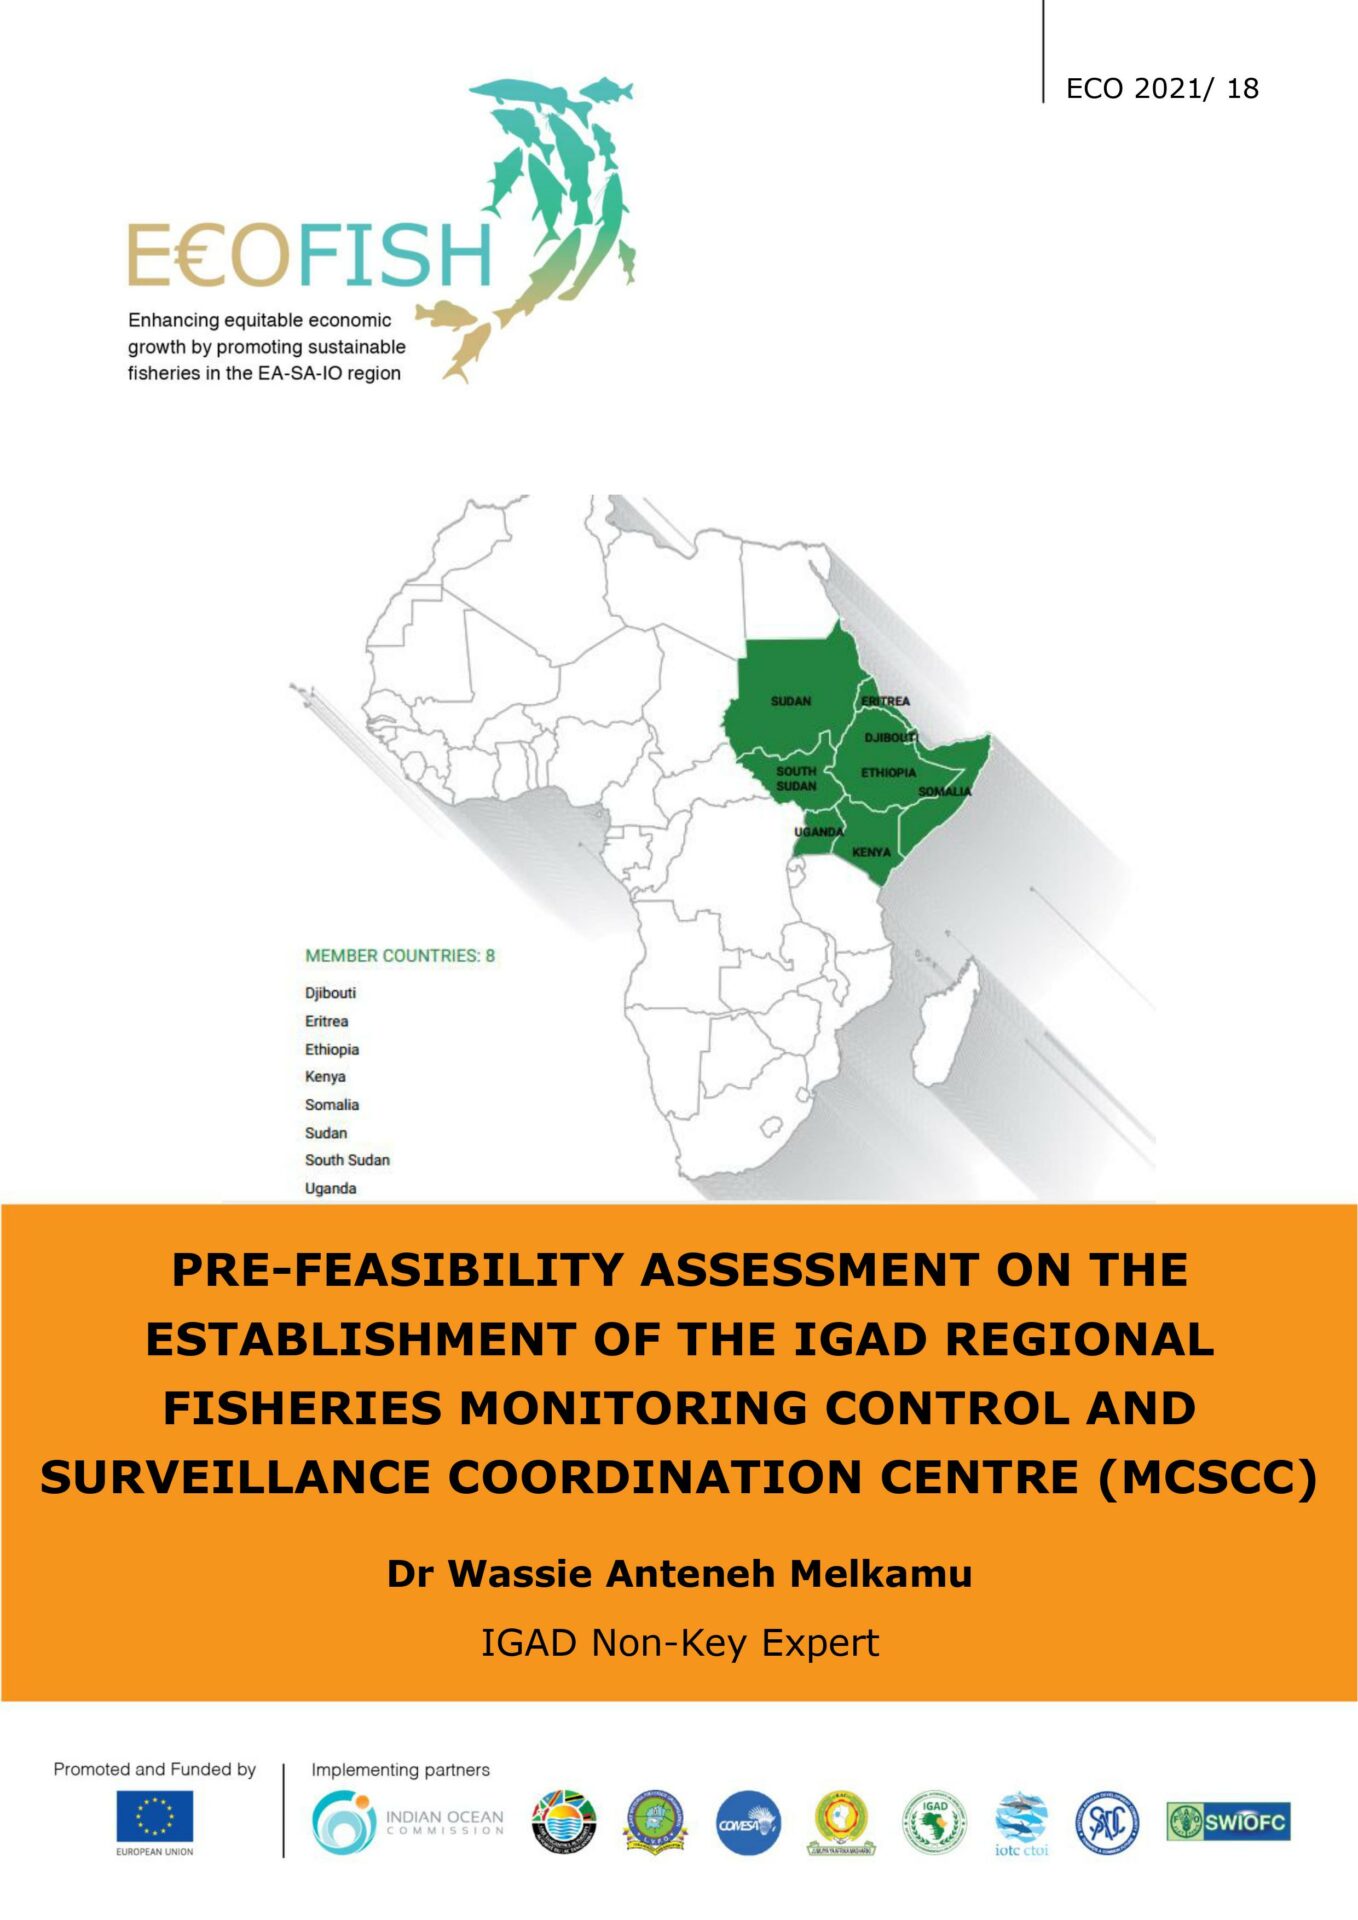 PRE-FEASIBILITY ASSESSMENT ON THE ESTABLISHMENT OF THE IGAD REGIONAL FISHERIES MONITORING CONTROL AND SURVEILLANCE COORDINATION CENTRE (MCSCC)